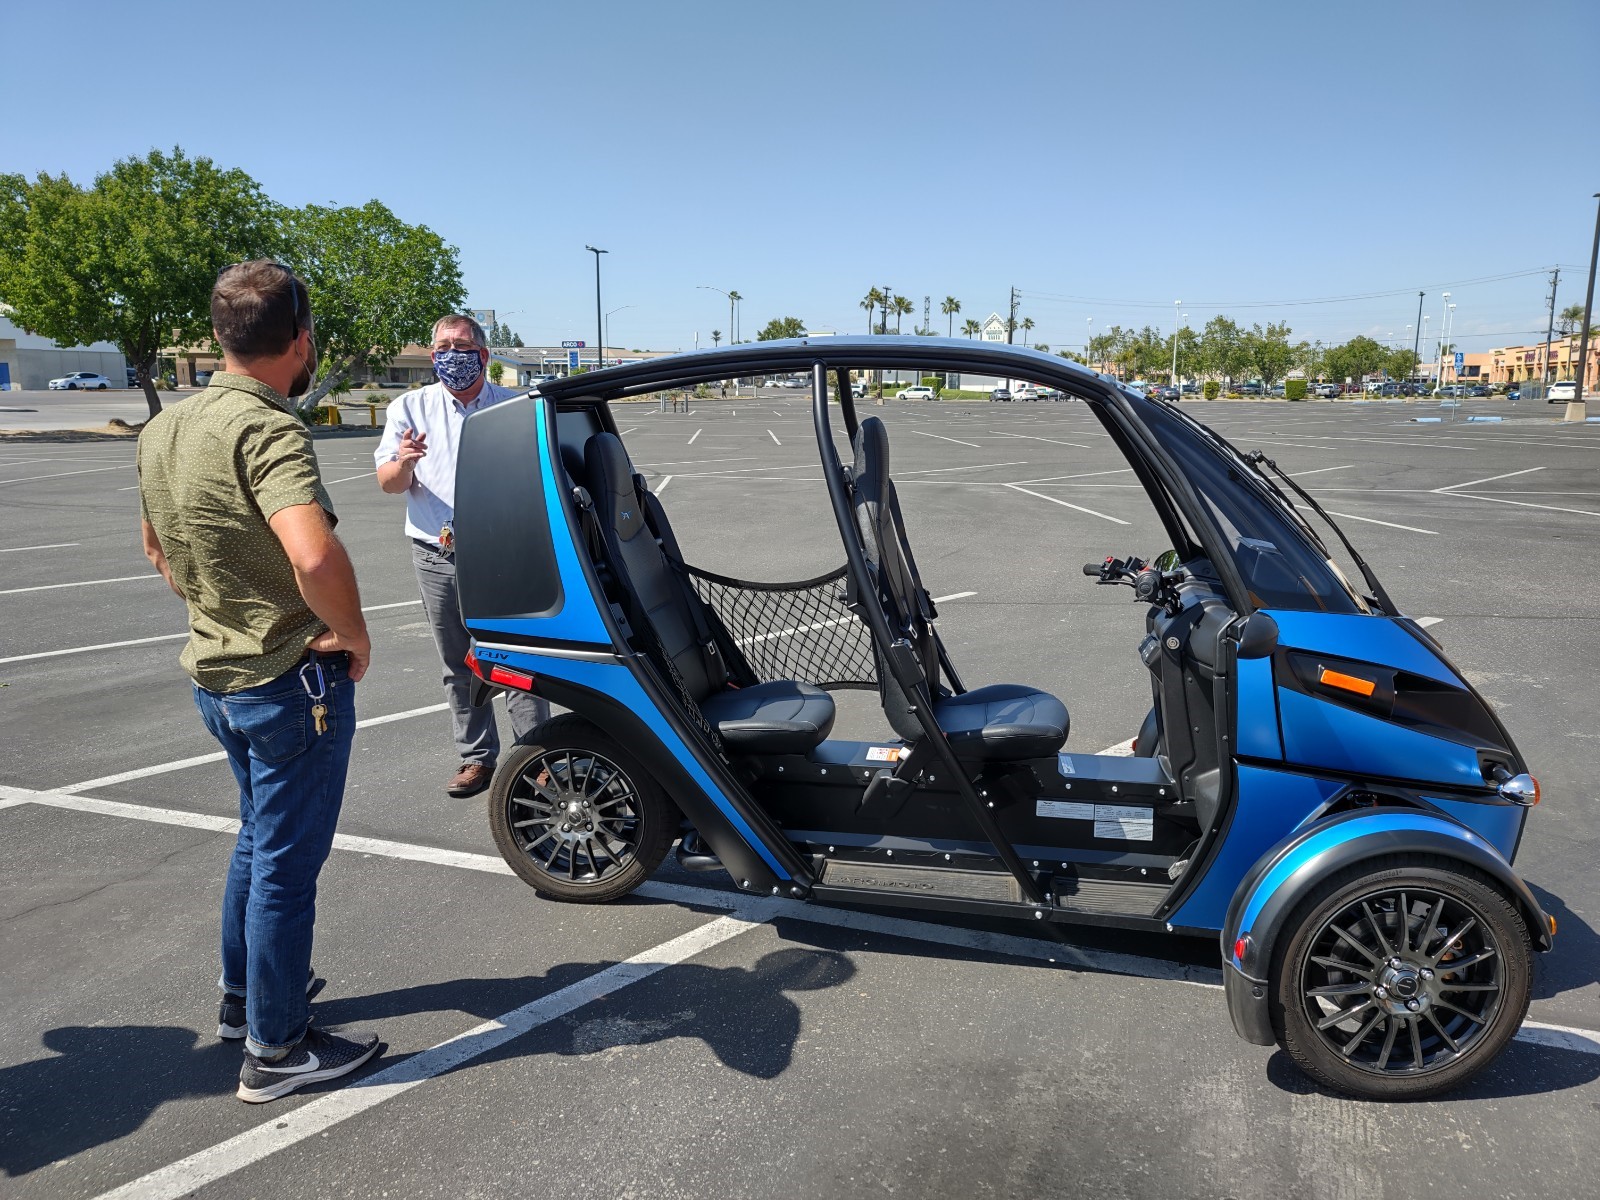 Arcimoto FUV demo at Manchester Center with two participants standing next to blue Arcimoto FUC